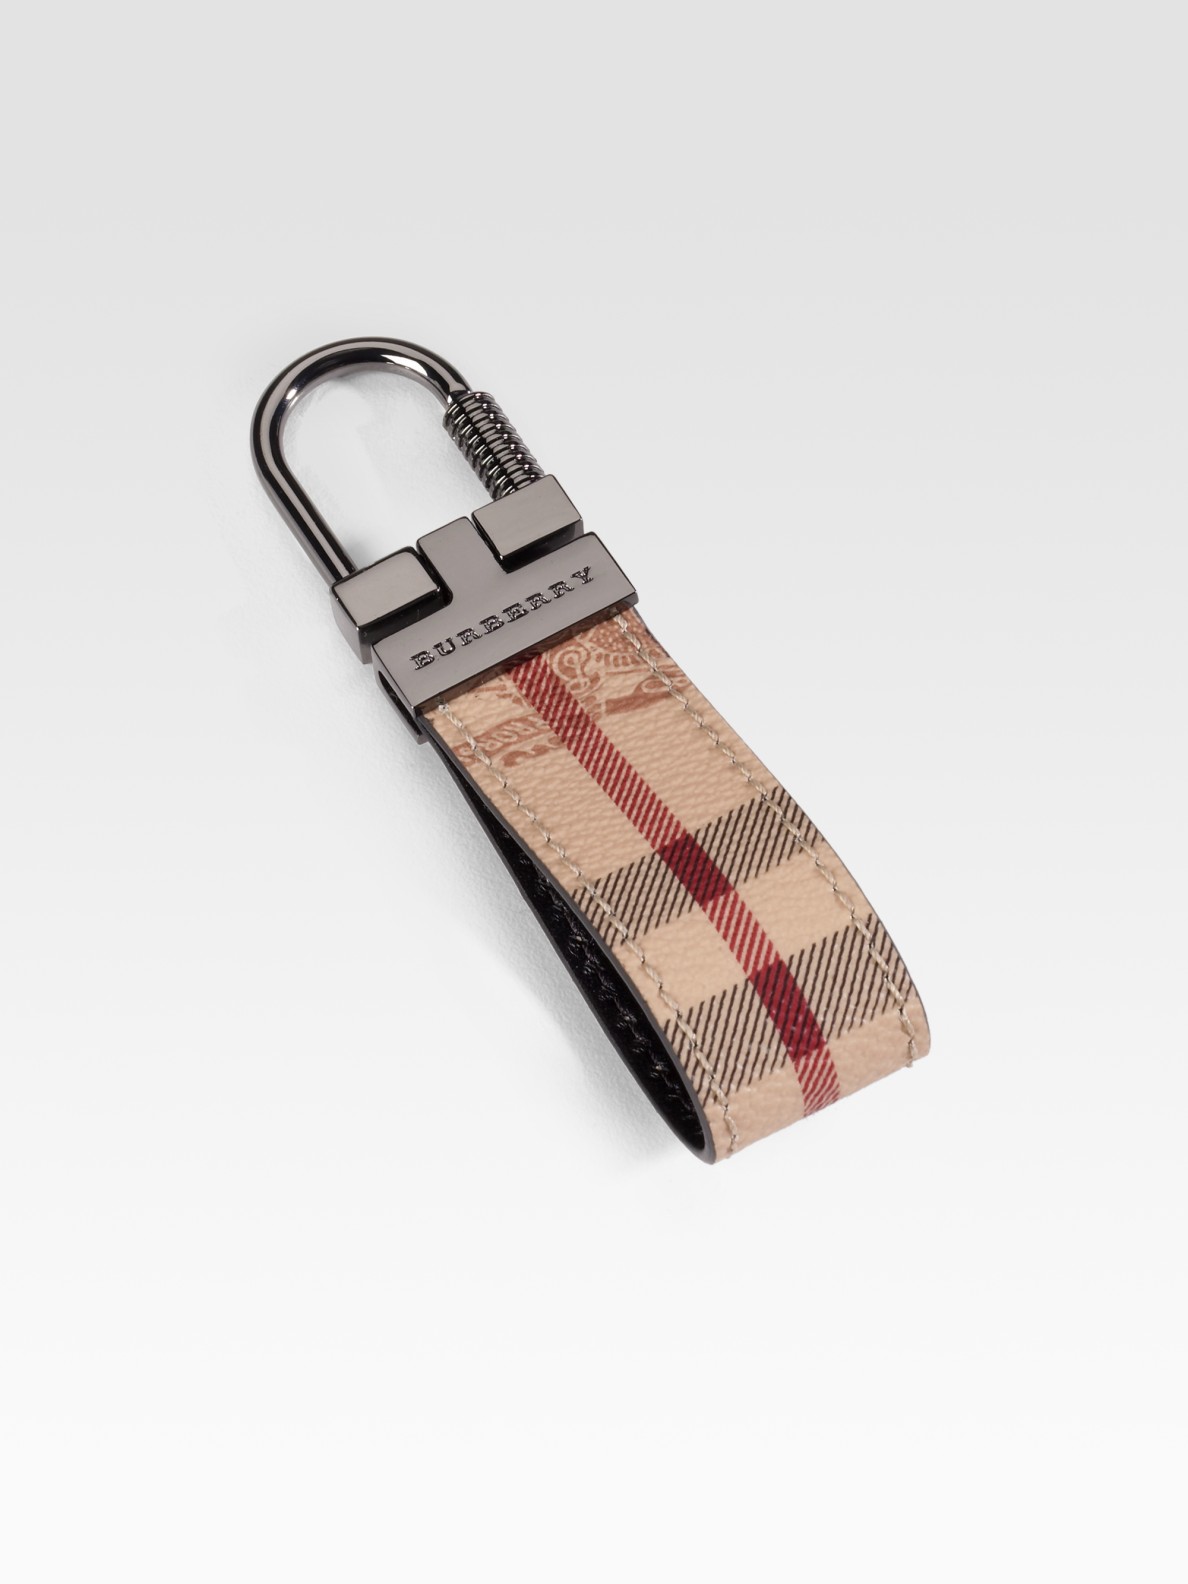 Burberry Leather Key Fob in Black 